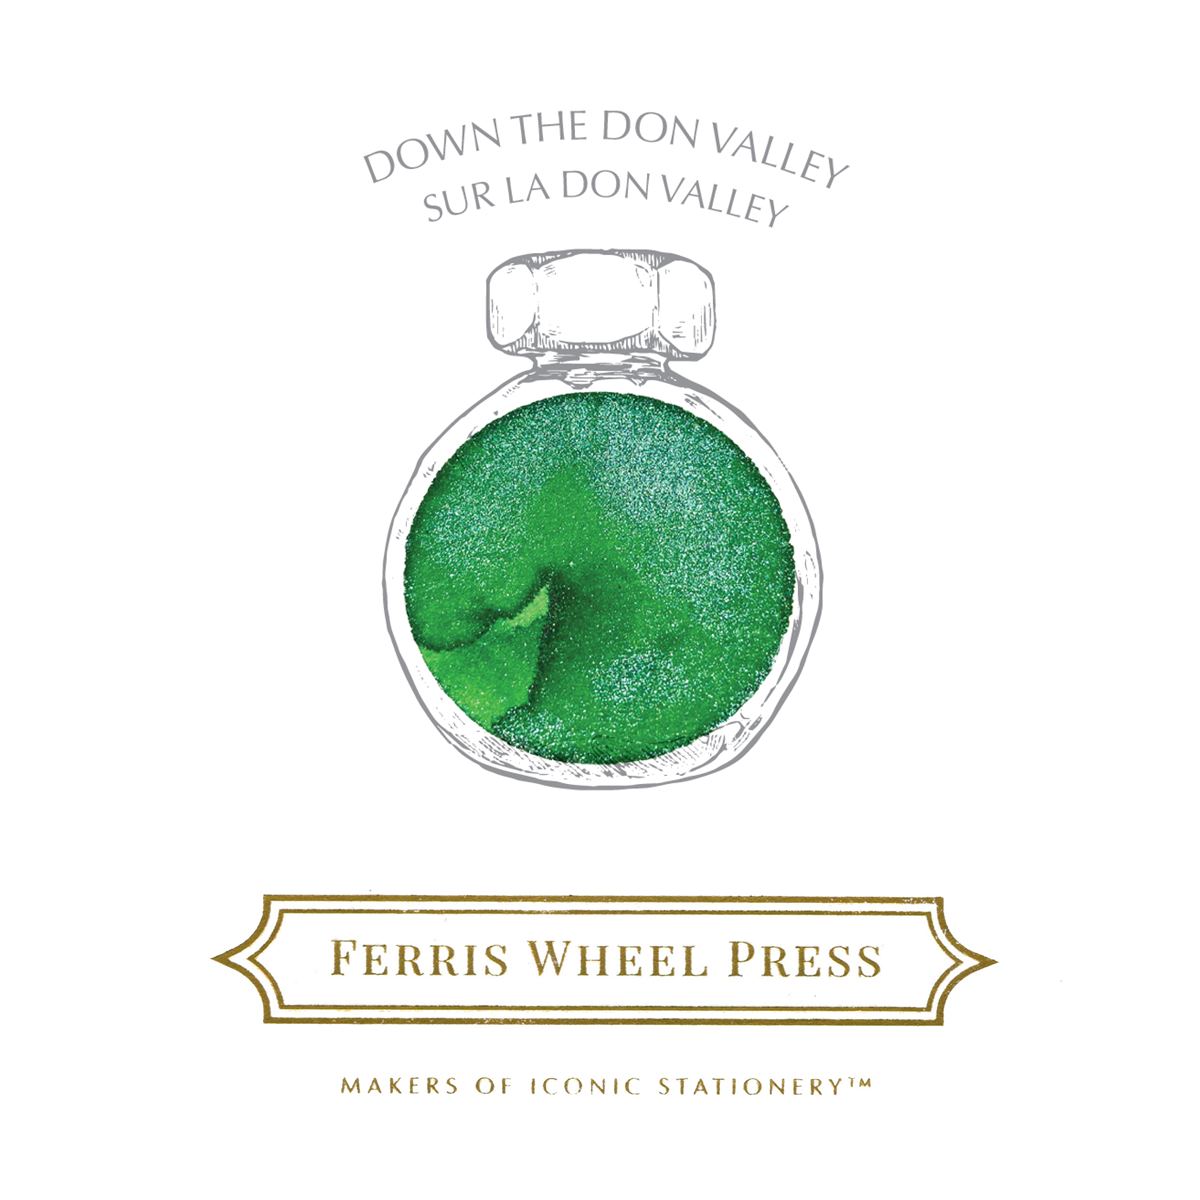 Ferris Wheel Press Fountain Pen Ink Charger Set | The Sugar Beach Collection